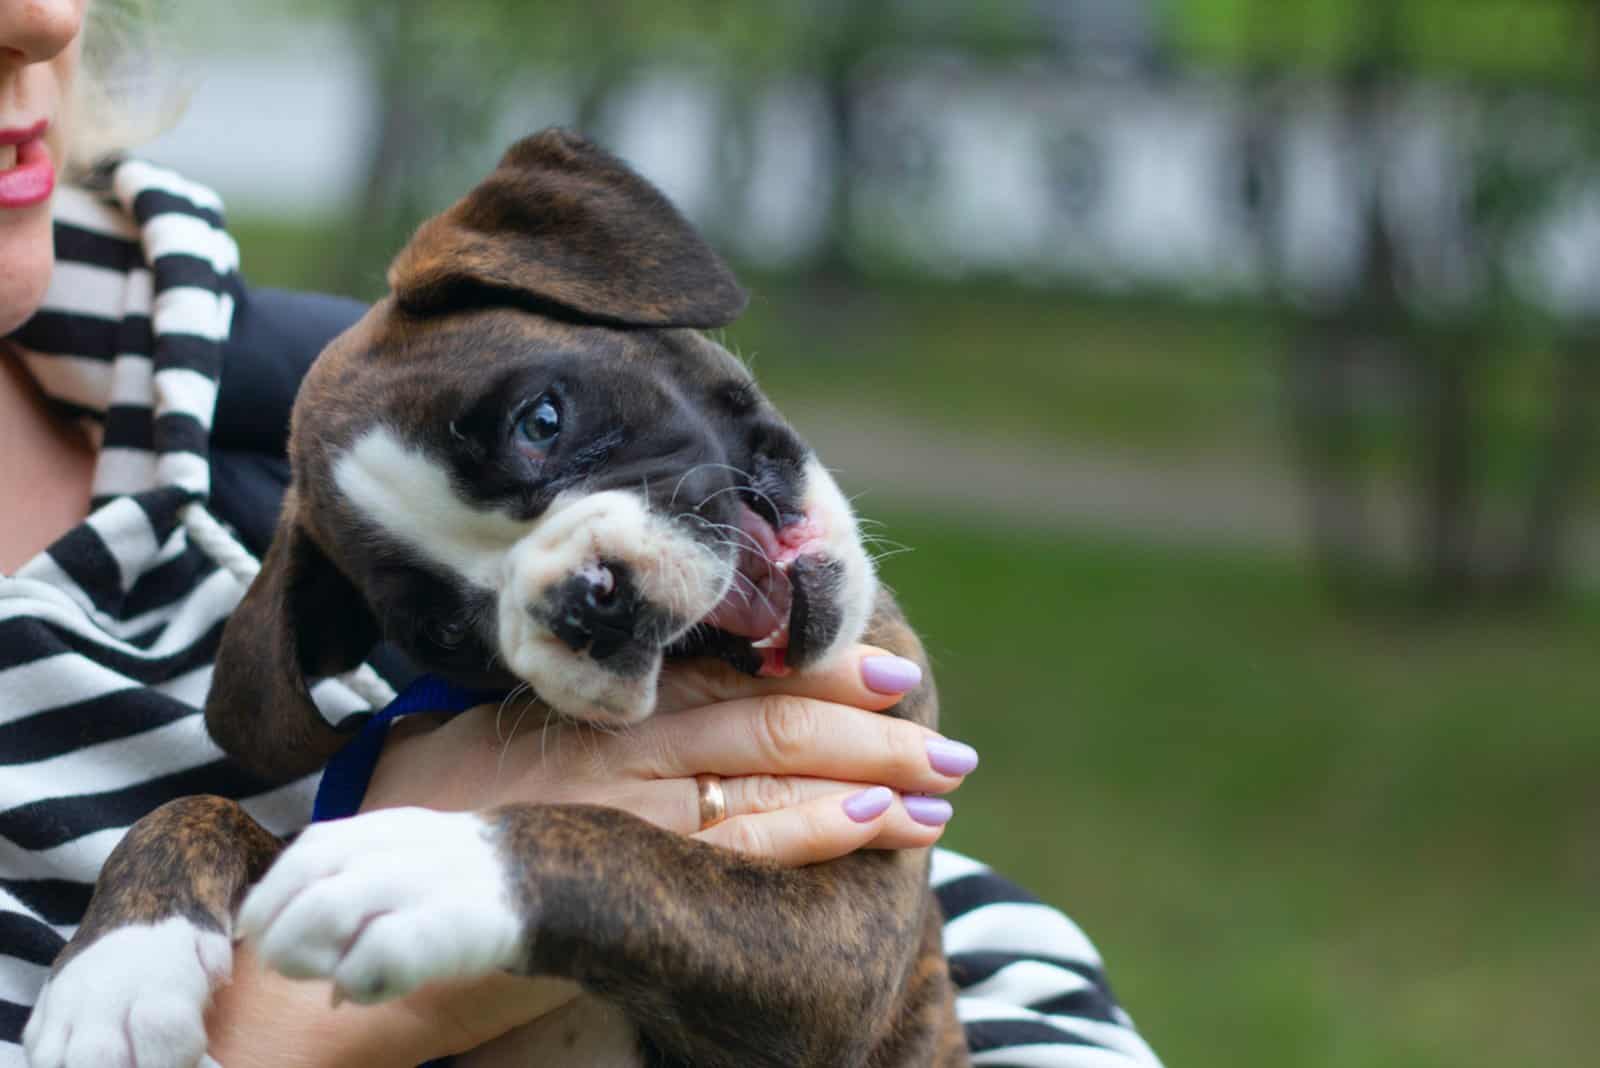 puppy biting hand of woman